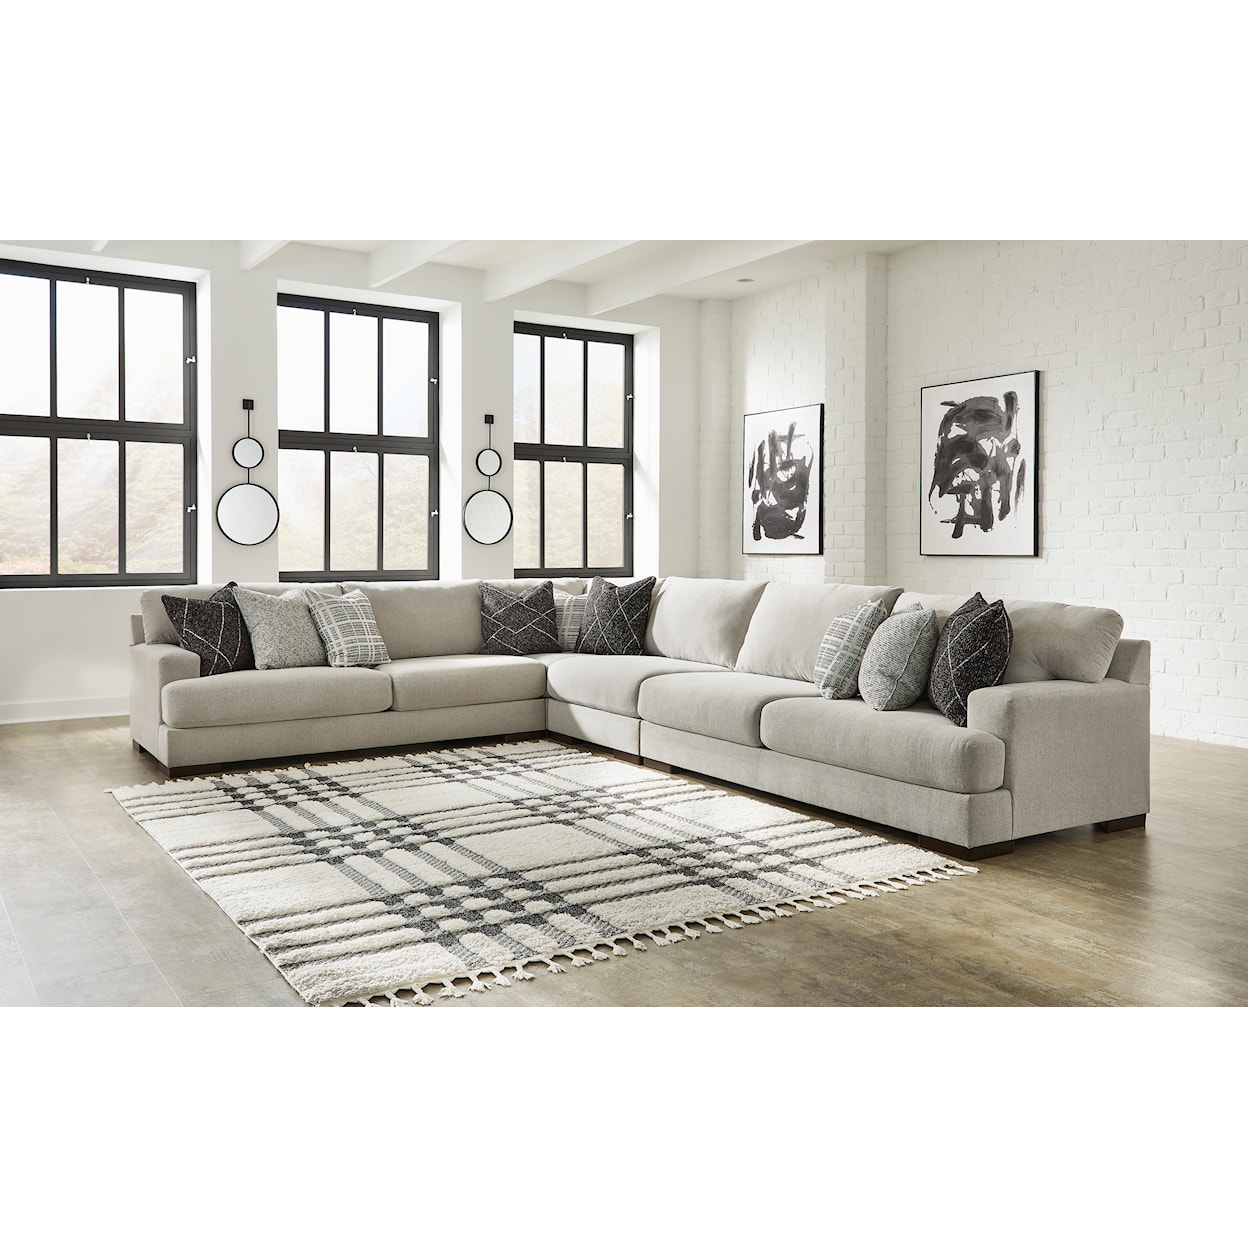 Benchcraft Alana 4-Piece Sectional